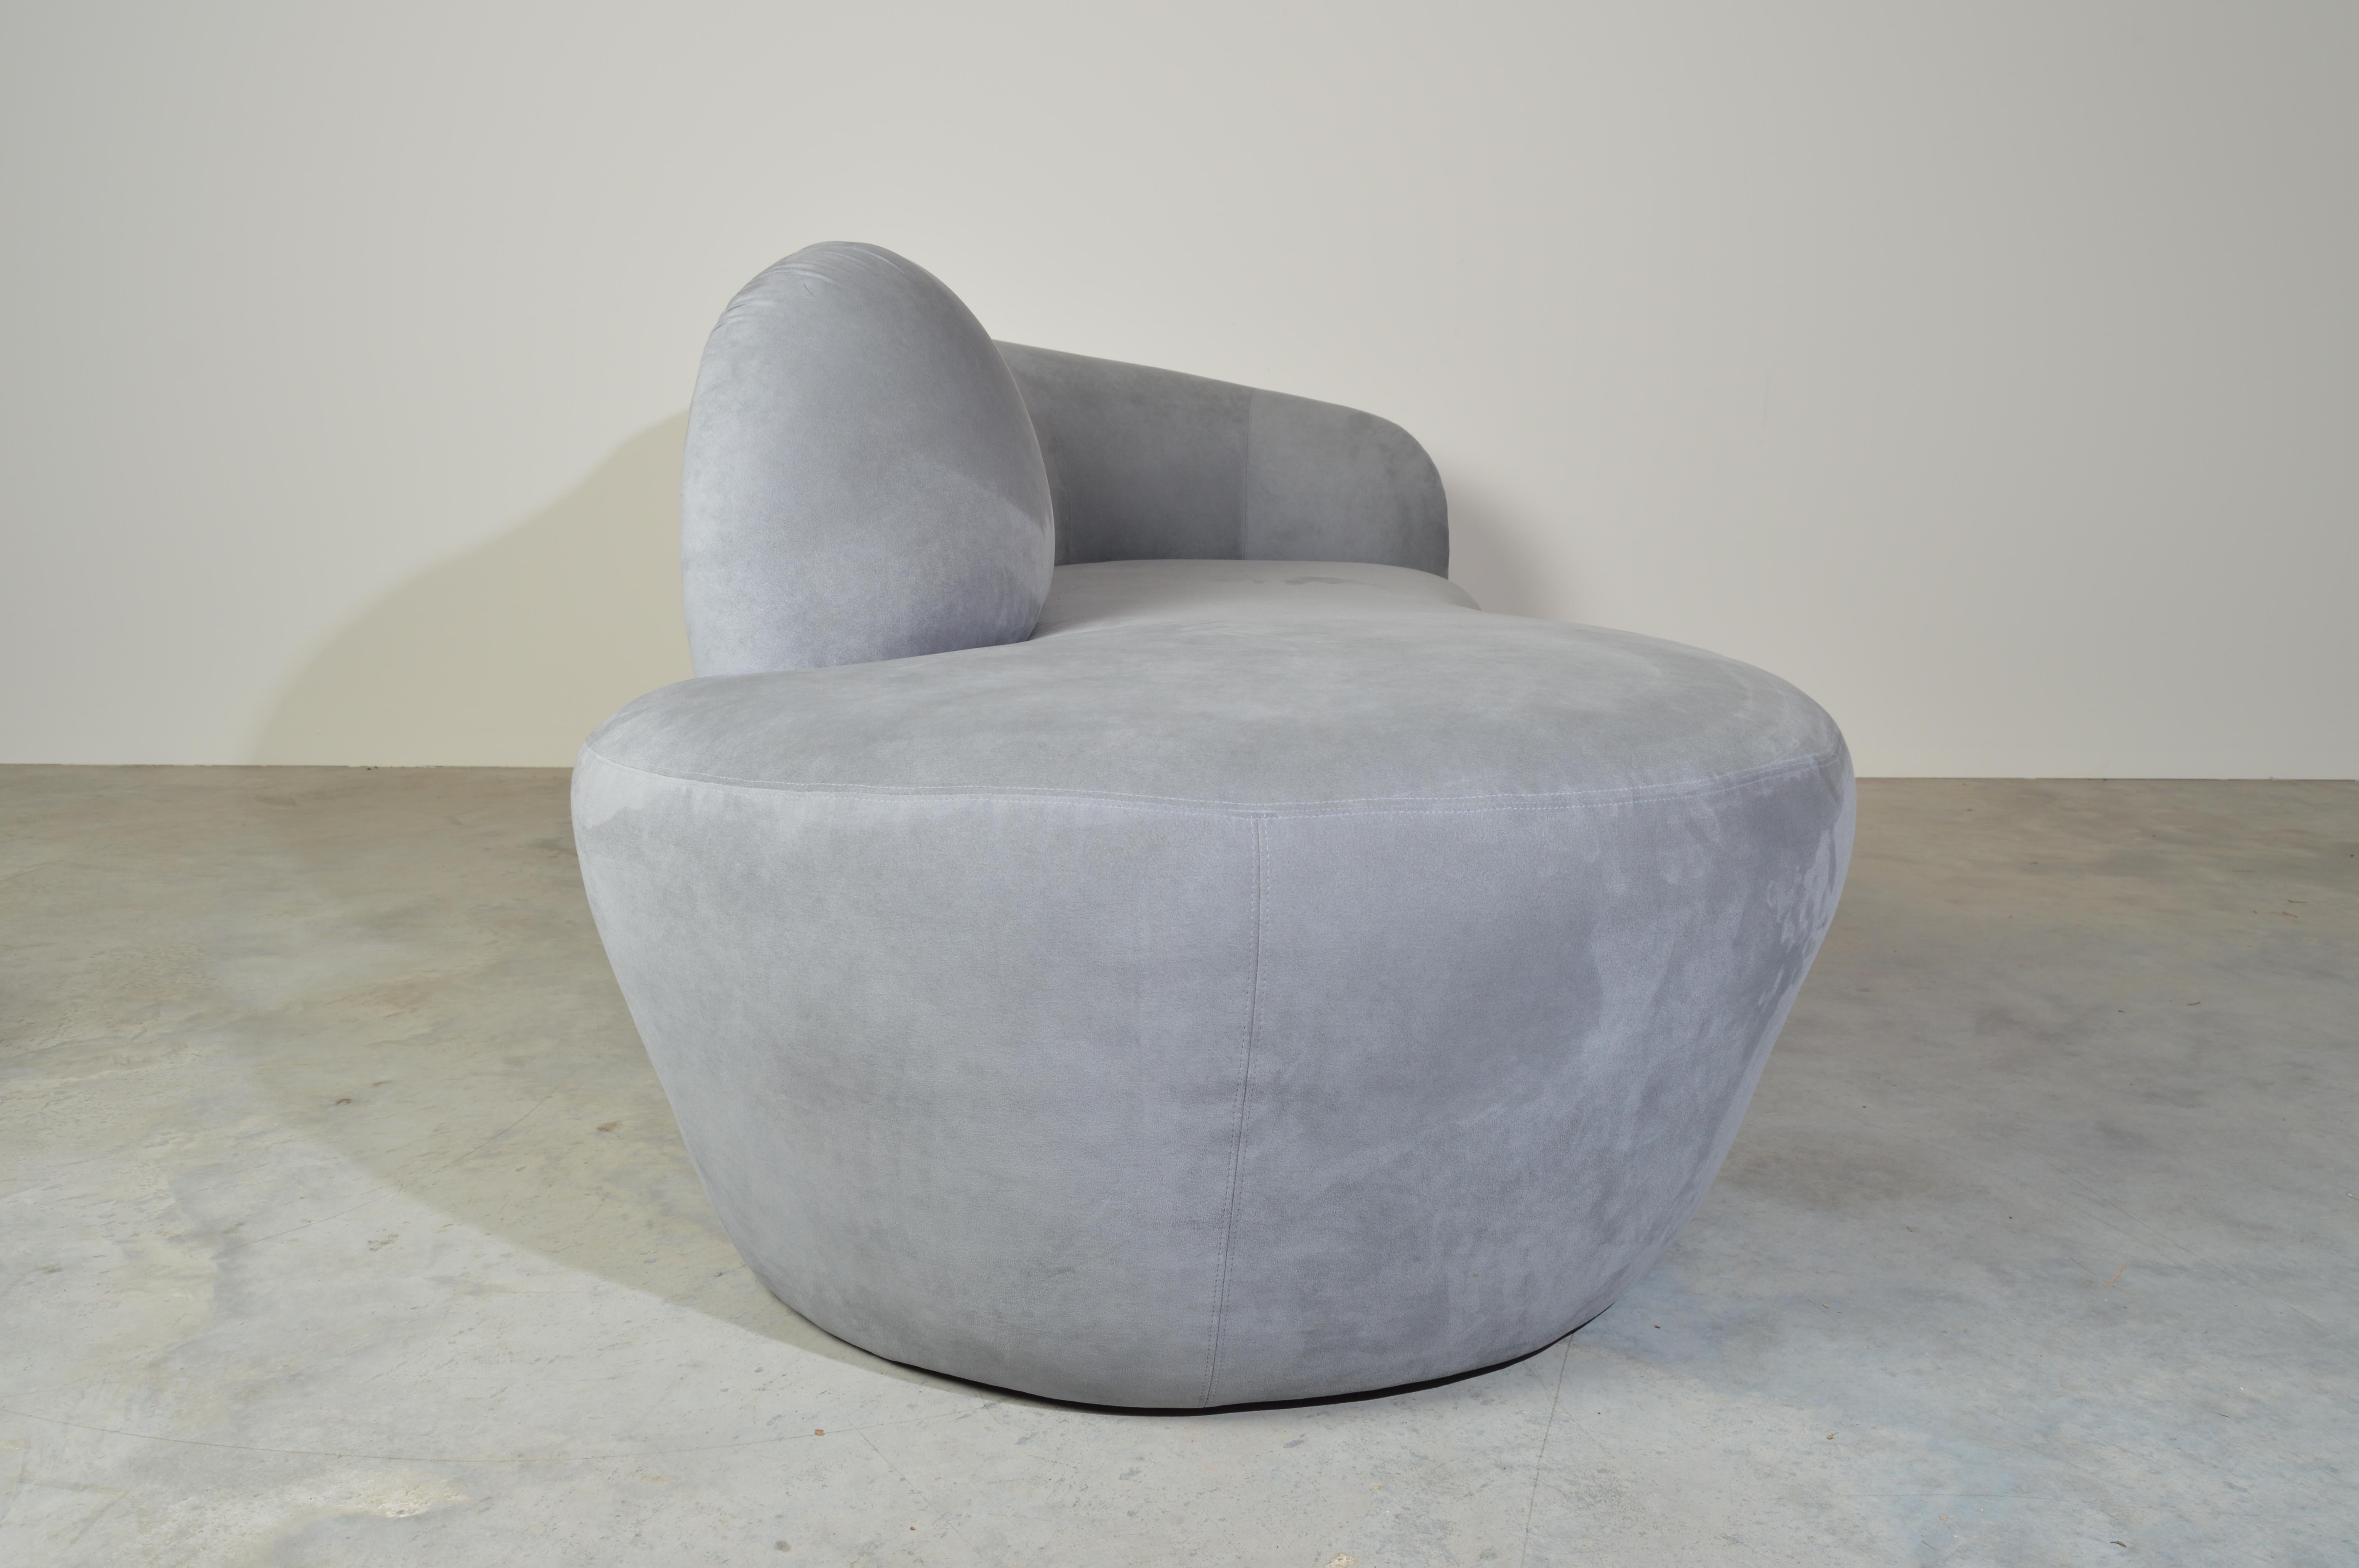 Contemporary Weiman Preview Sofa Chaise Lounge with Pouf Ottoman in Ultrasuede after Kagan